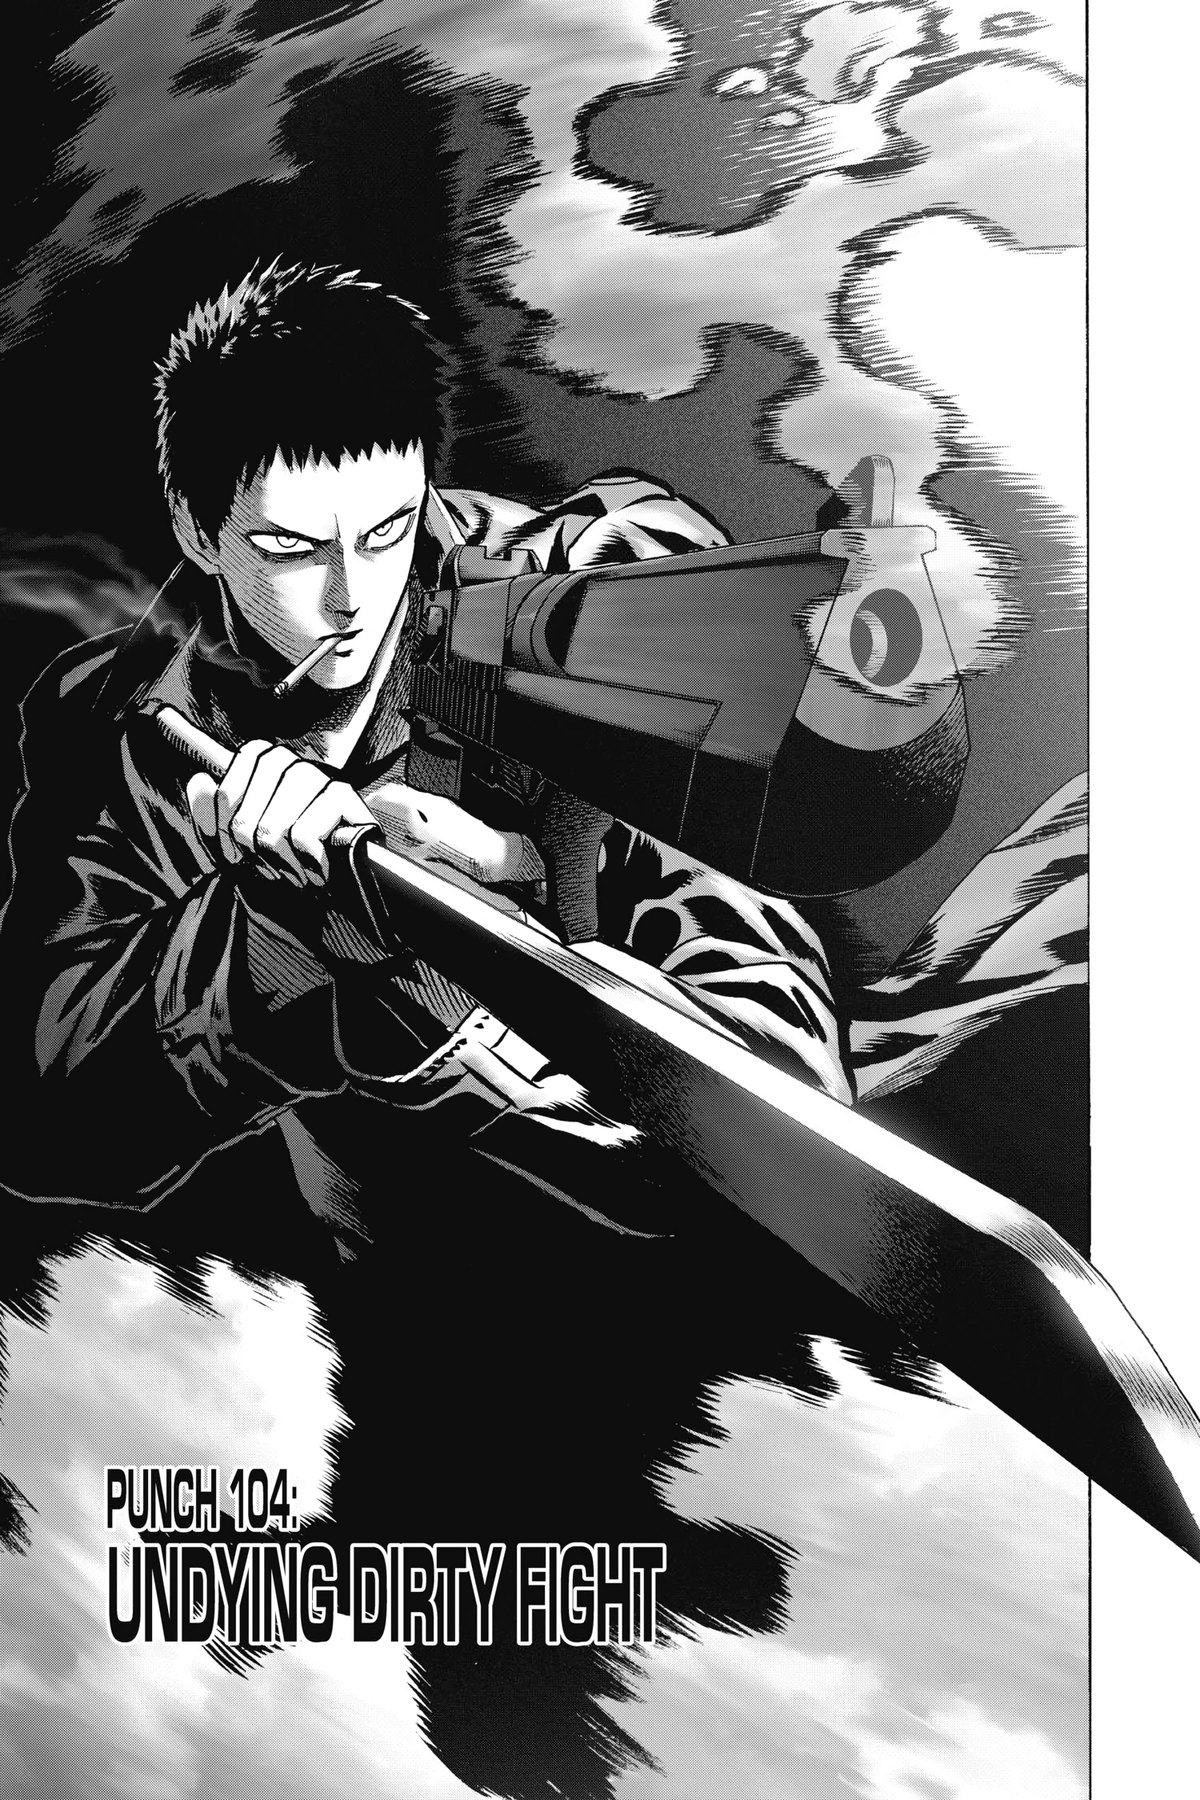 One Punch-Man Chapter 143 Discussion - Forums 